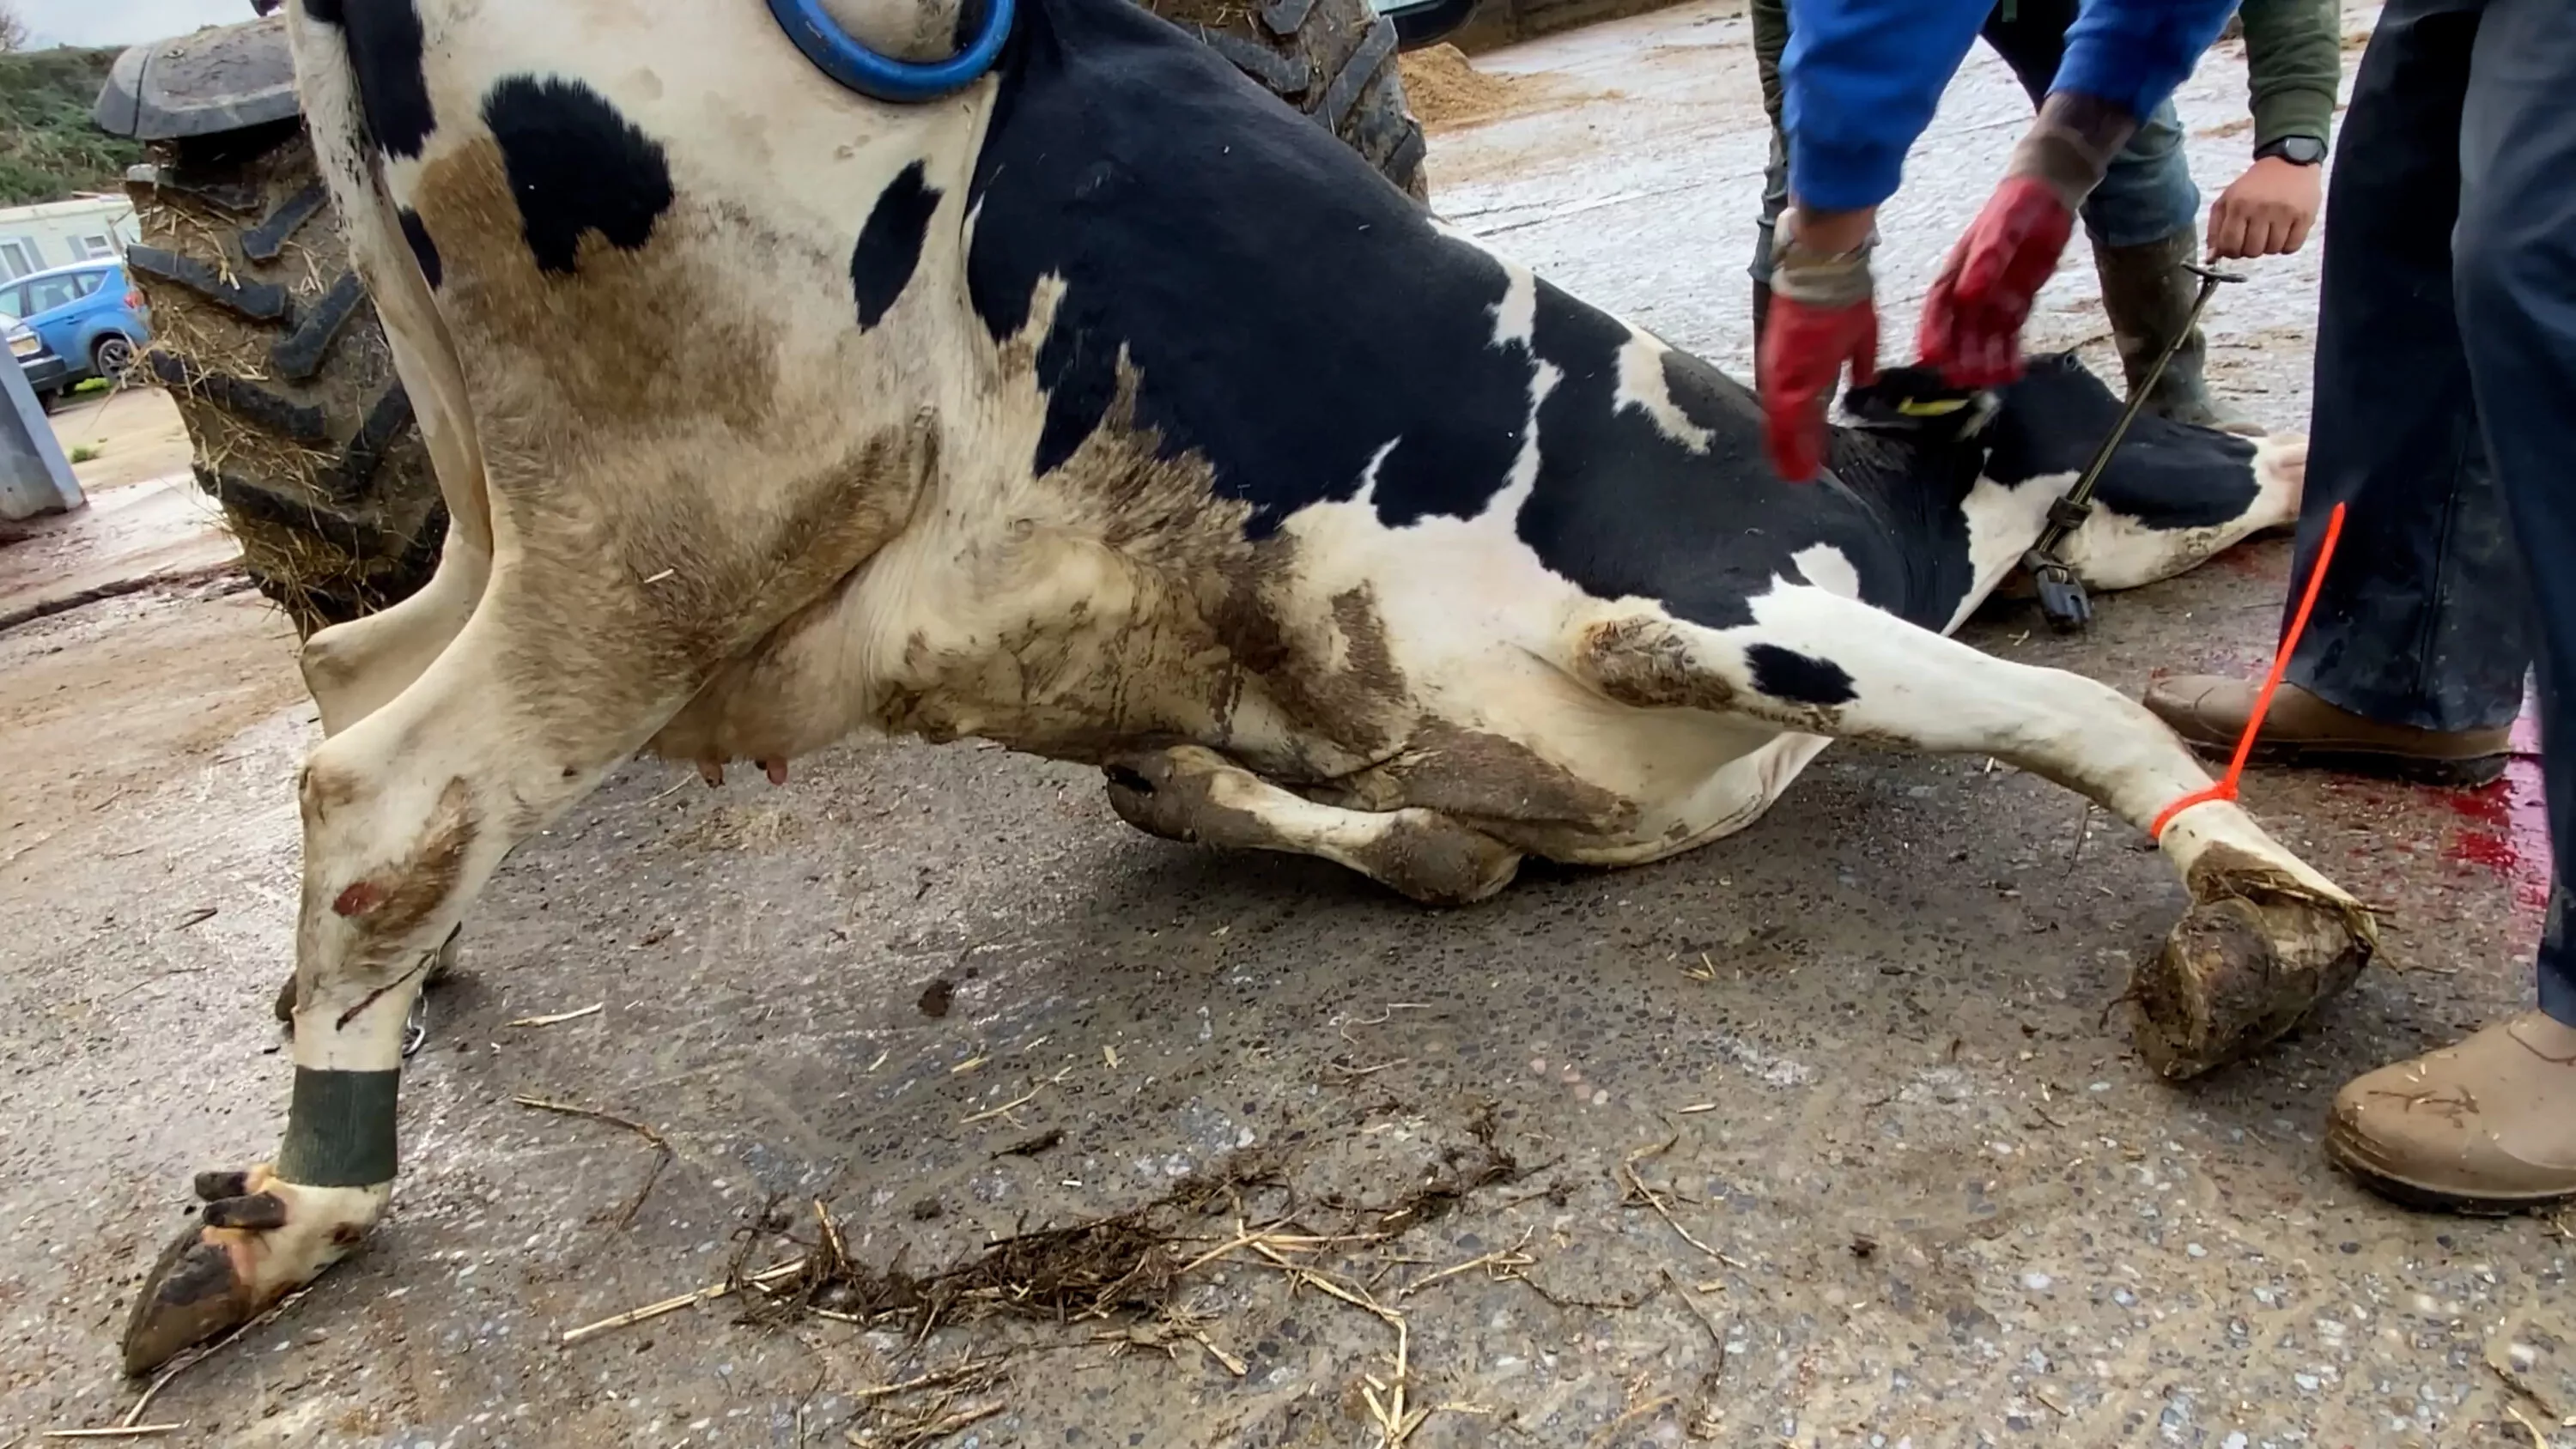 A lame cow is dragged by a tractor to be killed on a dairy farm